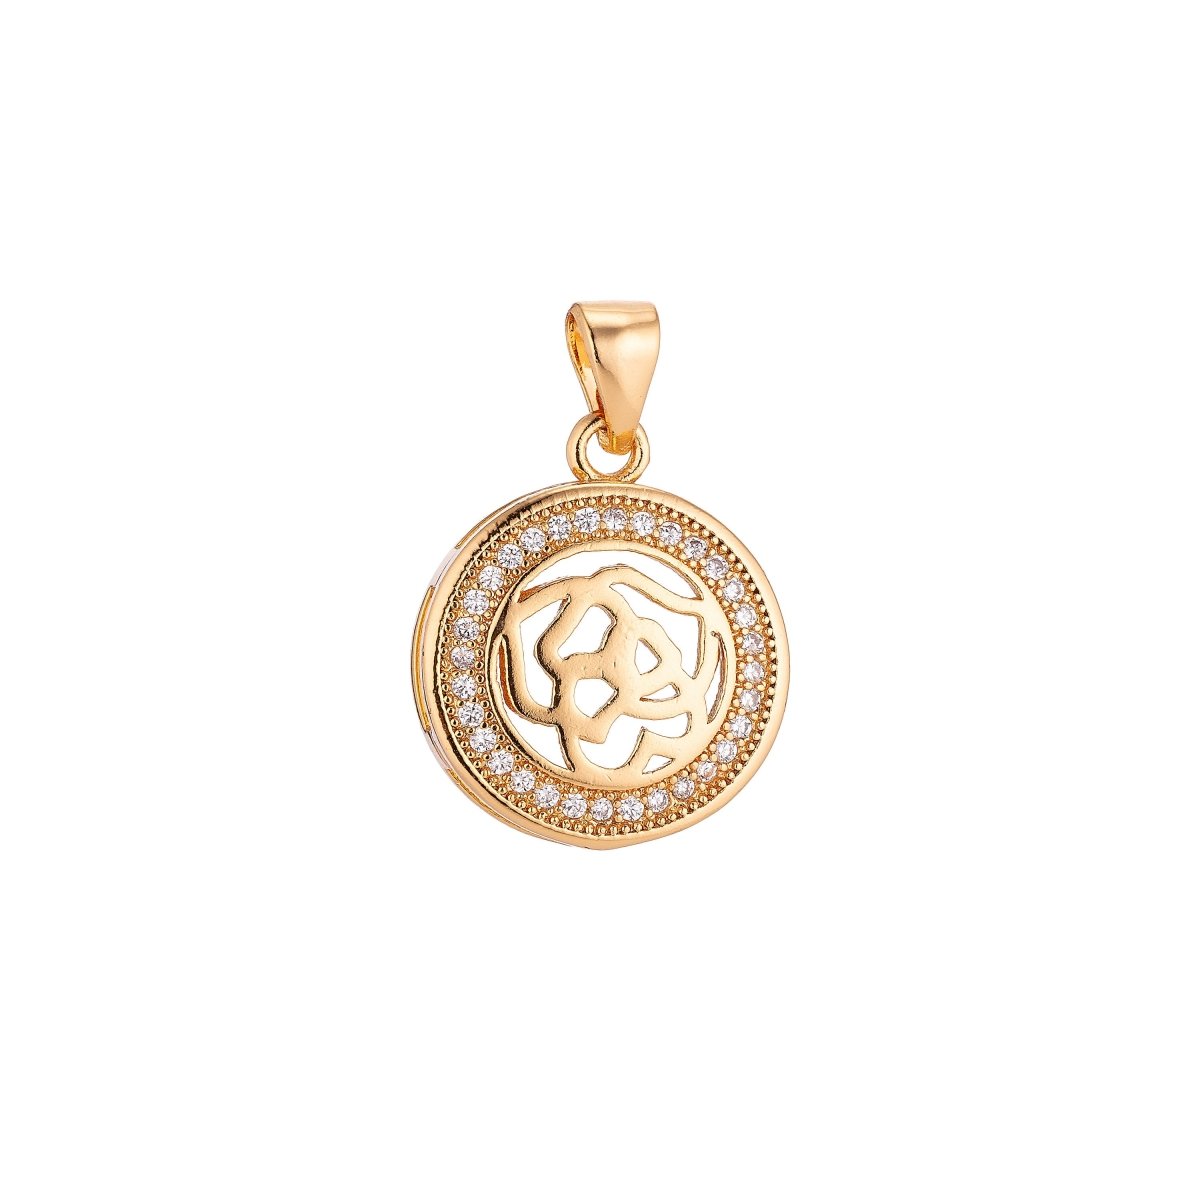 On Sale! CLEARANCE! Abstract Flower in White Gold / Gold Filled Coin Medallion Charm Pendant Cubic Zircon CZ Dainty Pendant for Necklace Jewelry Making, CL-H277 - DLUXCA